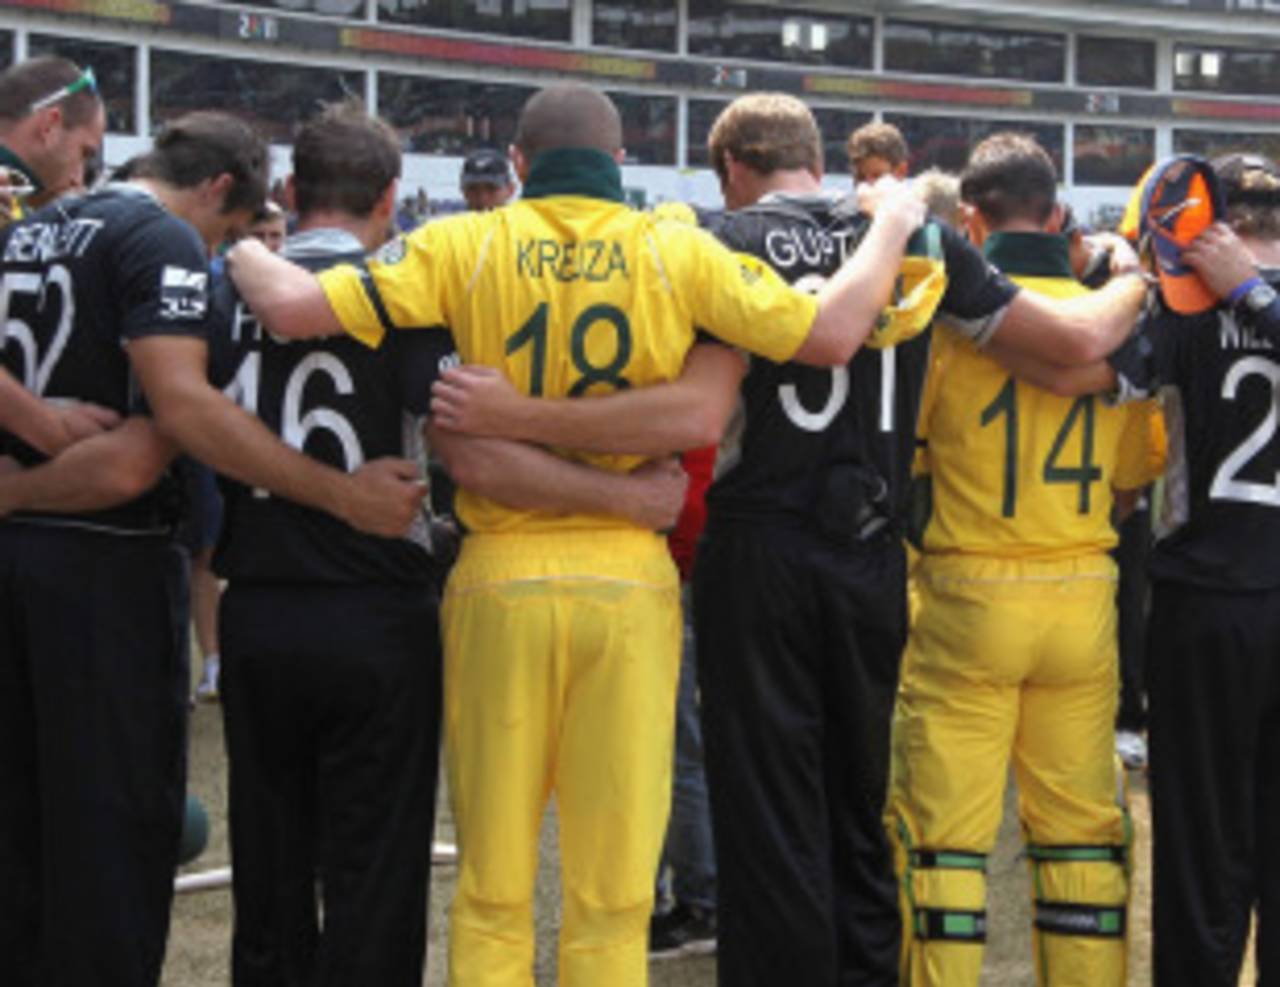 Australia and New Zealand stand together in memory of the victims of the Christchurch earthquake, Australia v New Zealand, Group A, Nagpur, February 25, 2011